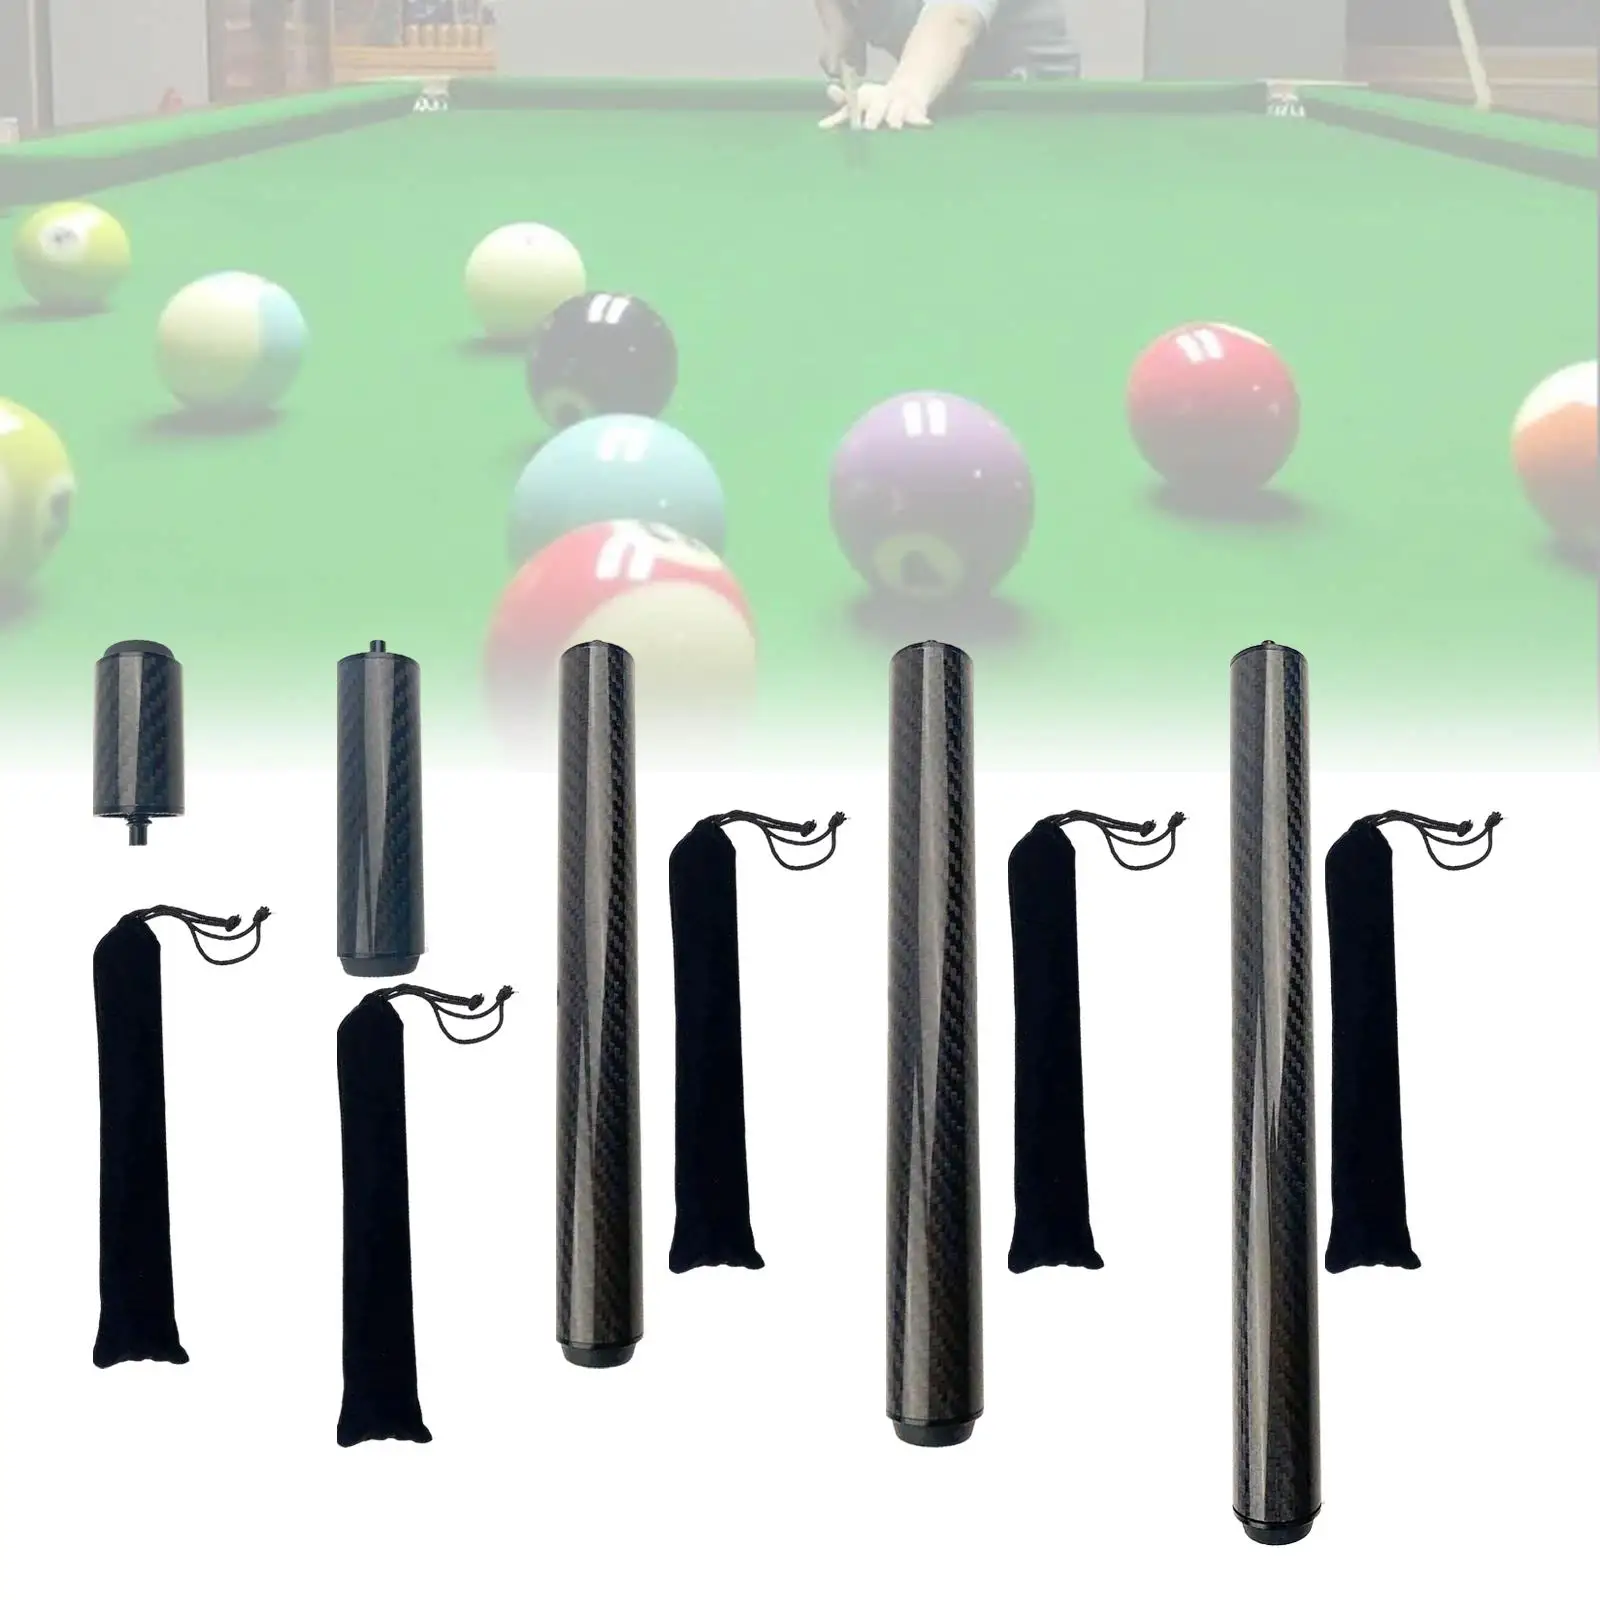 Billiards Pool Cue Extension Compact Carbon Fiber Cue Stick Extenders Billiard Connect Shaft Snooker for Billiard Cues Beginners